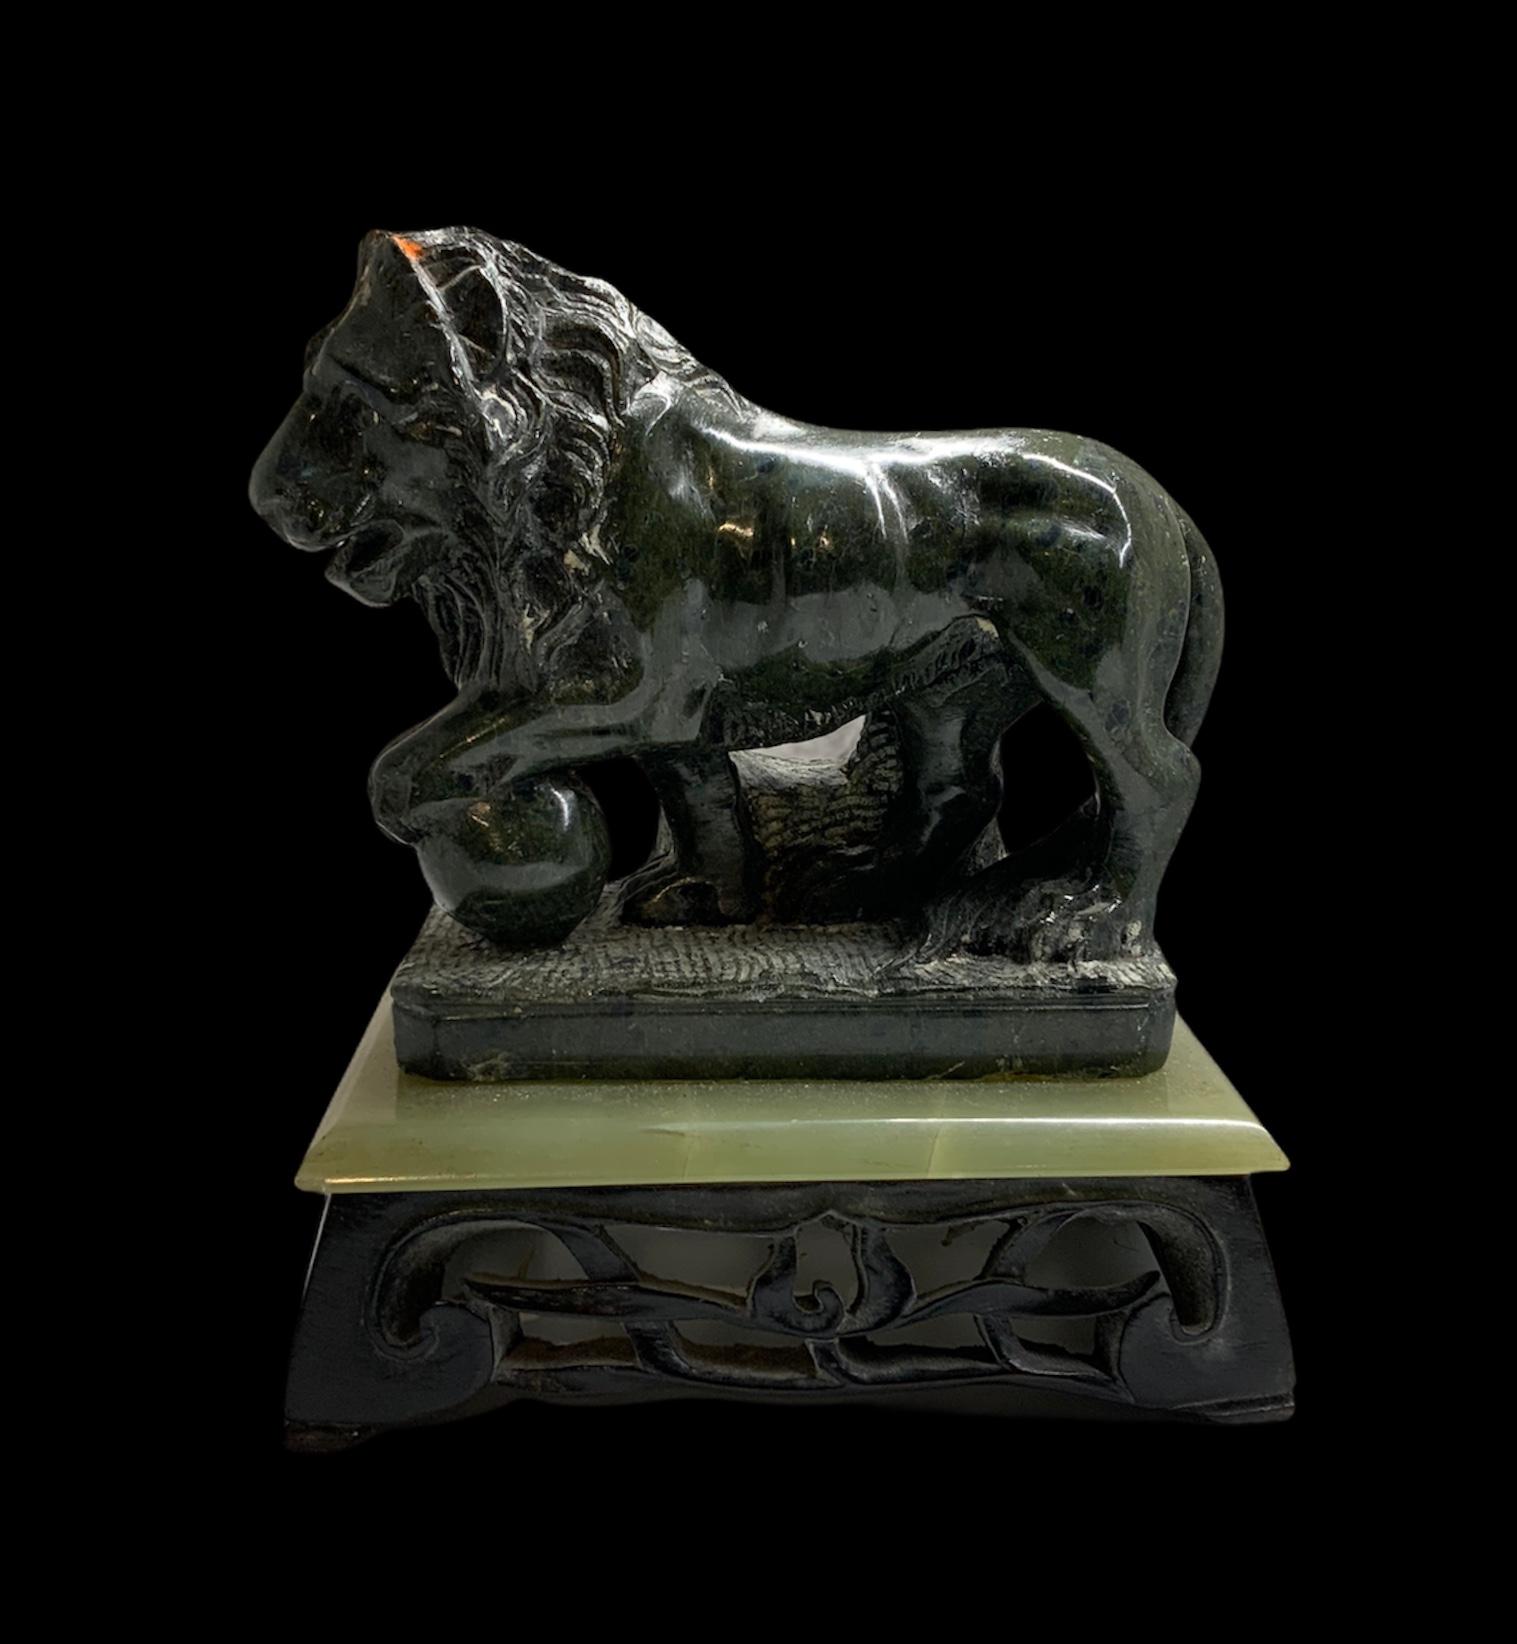 This a carved sculpture of what appears to be granite stone of a lion holding a ball with his paw. It is standing over a rectangular light green onyx plaque that is supported by a dark wood rectangular pierced base adorned with branches of leaves.